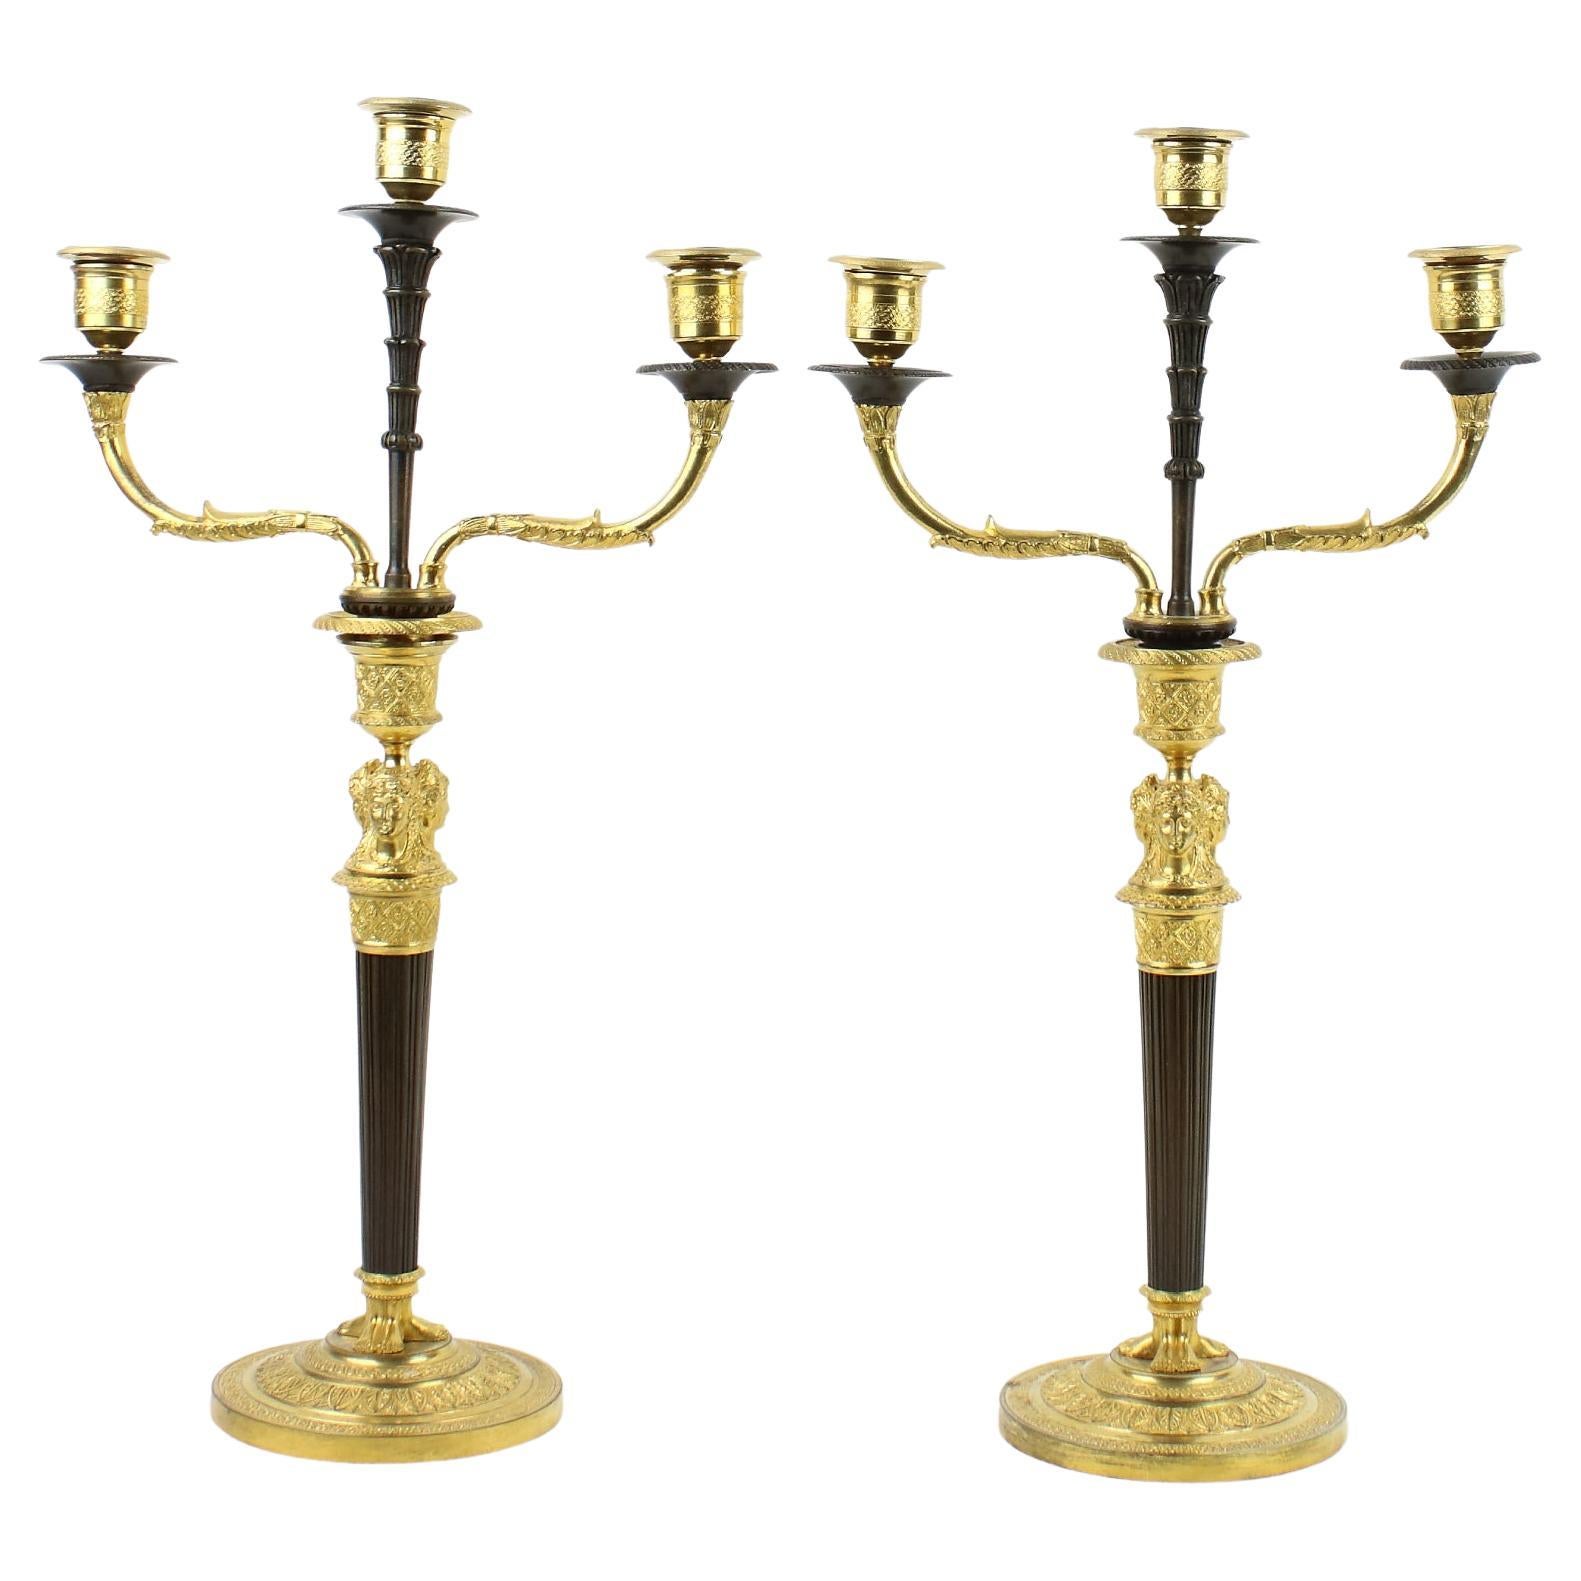 Early 19th Century Pair of Empire Bronze Female Caryatids Candelabras For Sale